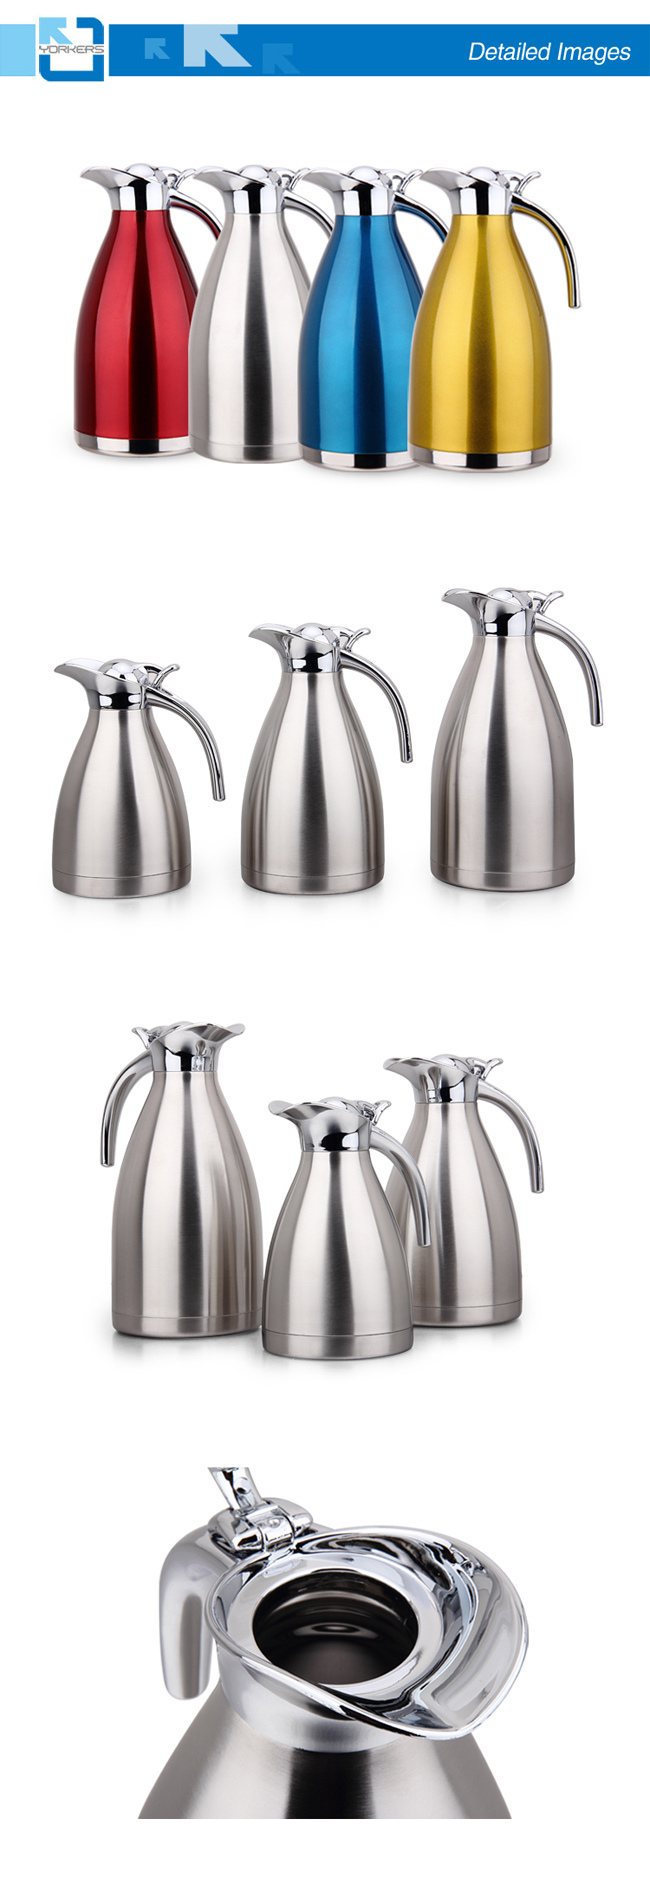 Hot Sale 1.0L/1.5L/2.0L Double Wall Stainless Steel Water Jug & Coffee Carafe